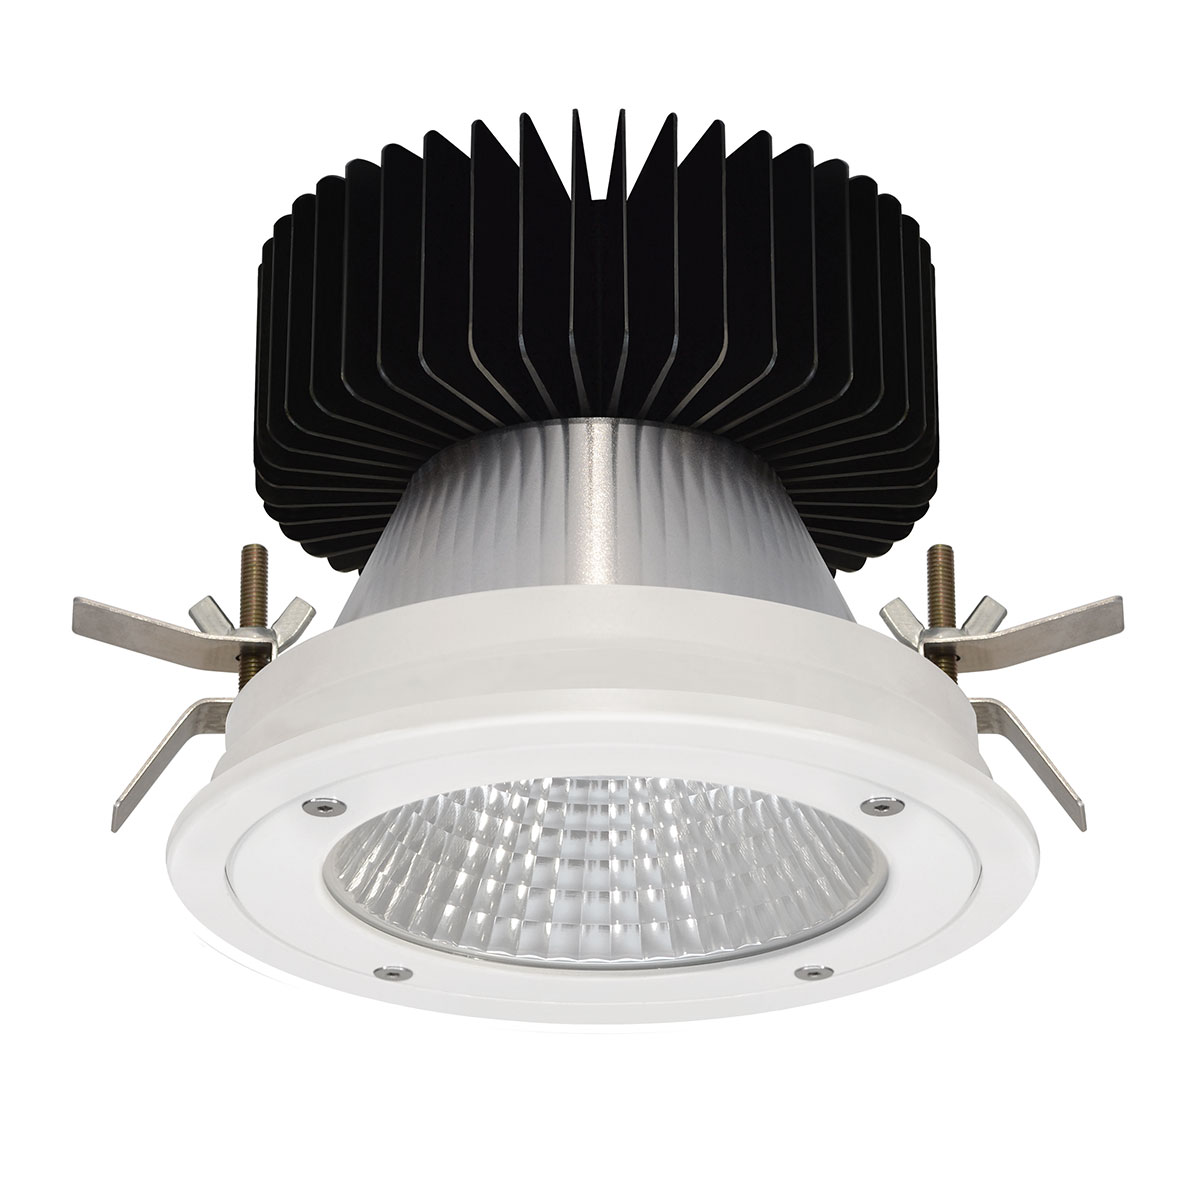 Kopa 35W Anti Tamper Fixed Round Recessed Downlight IP65 Rated 60° Degree Reflector Black